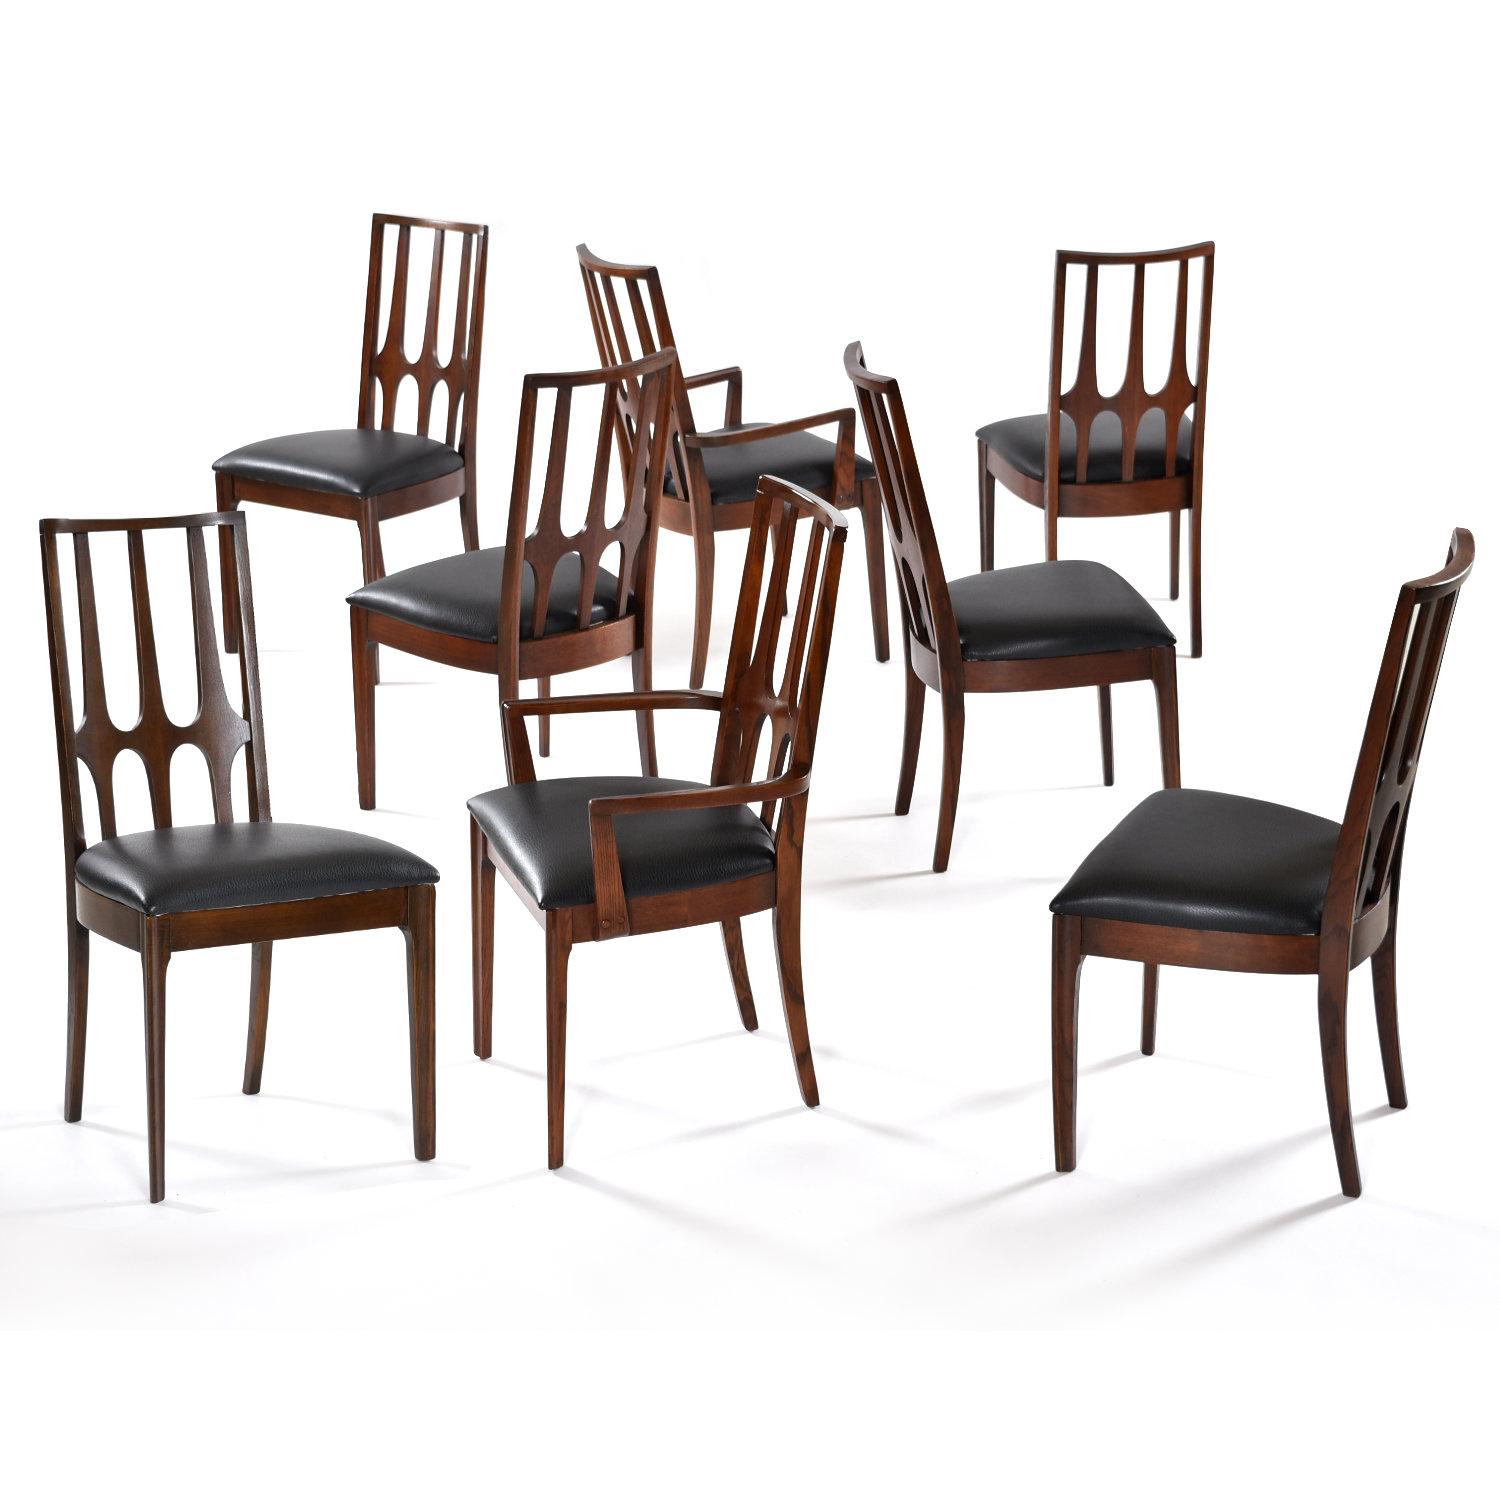 Mid-Century Modern Restored Broyhill Brasilia Dining Set with Expanding Table and 8 Chairs